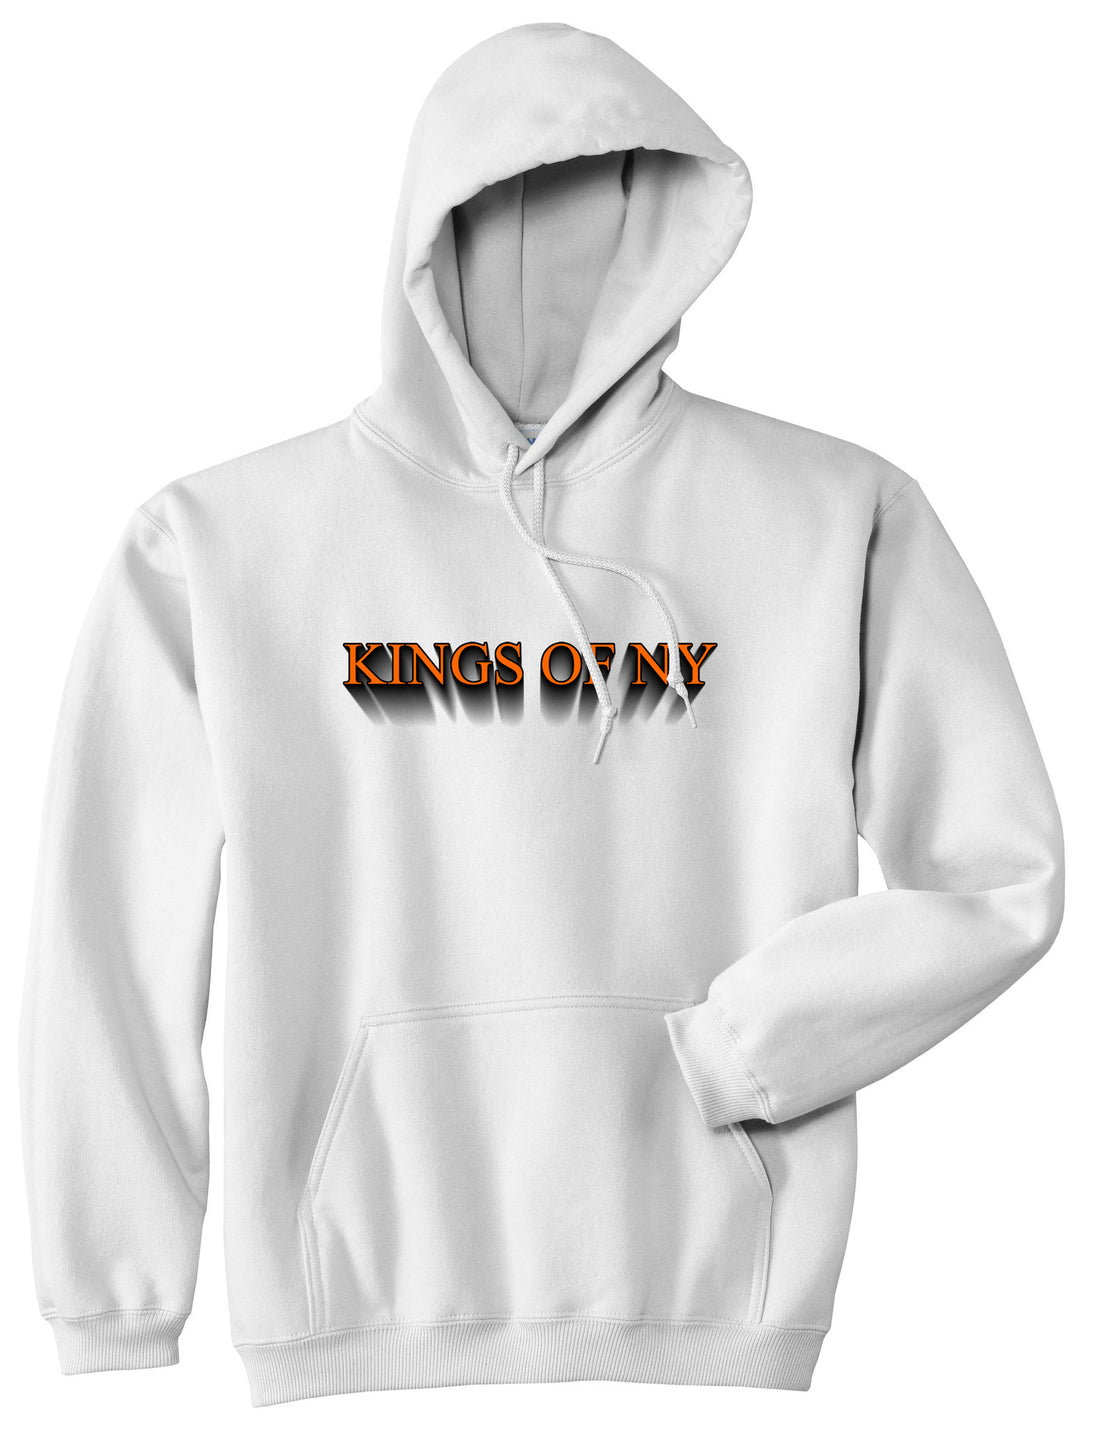 3D Text Pullover Hoodie in White